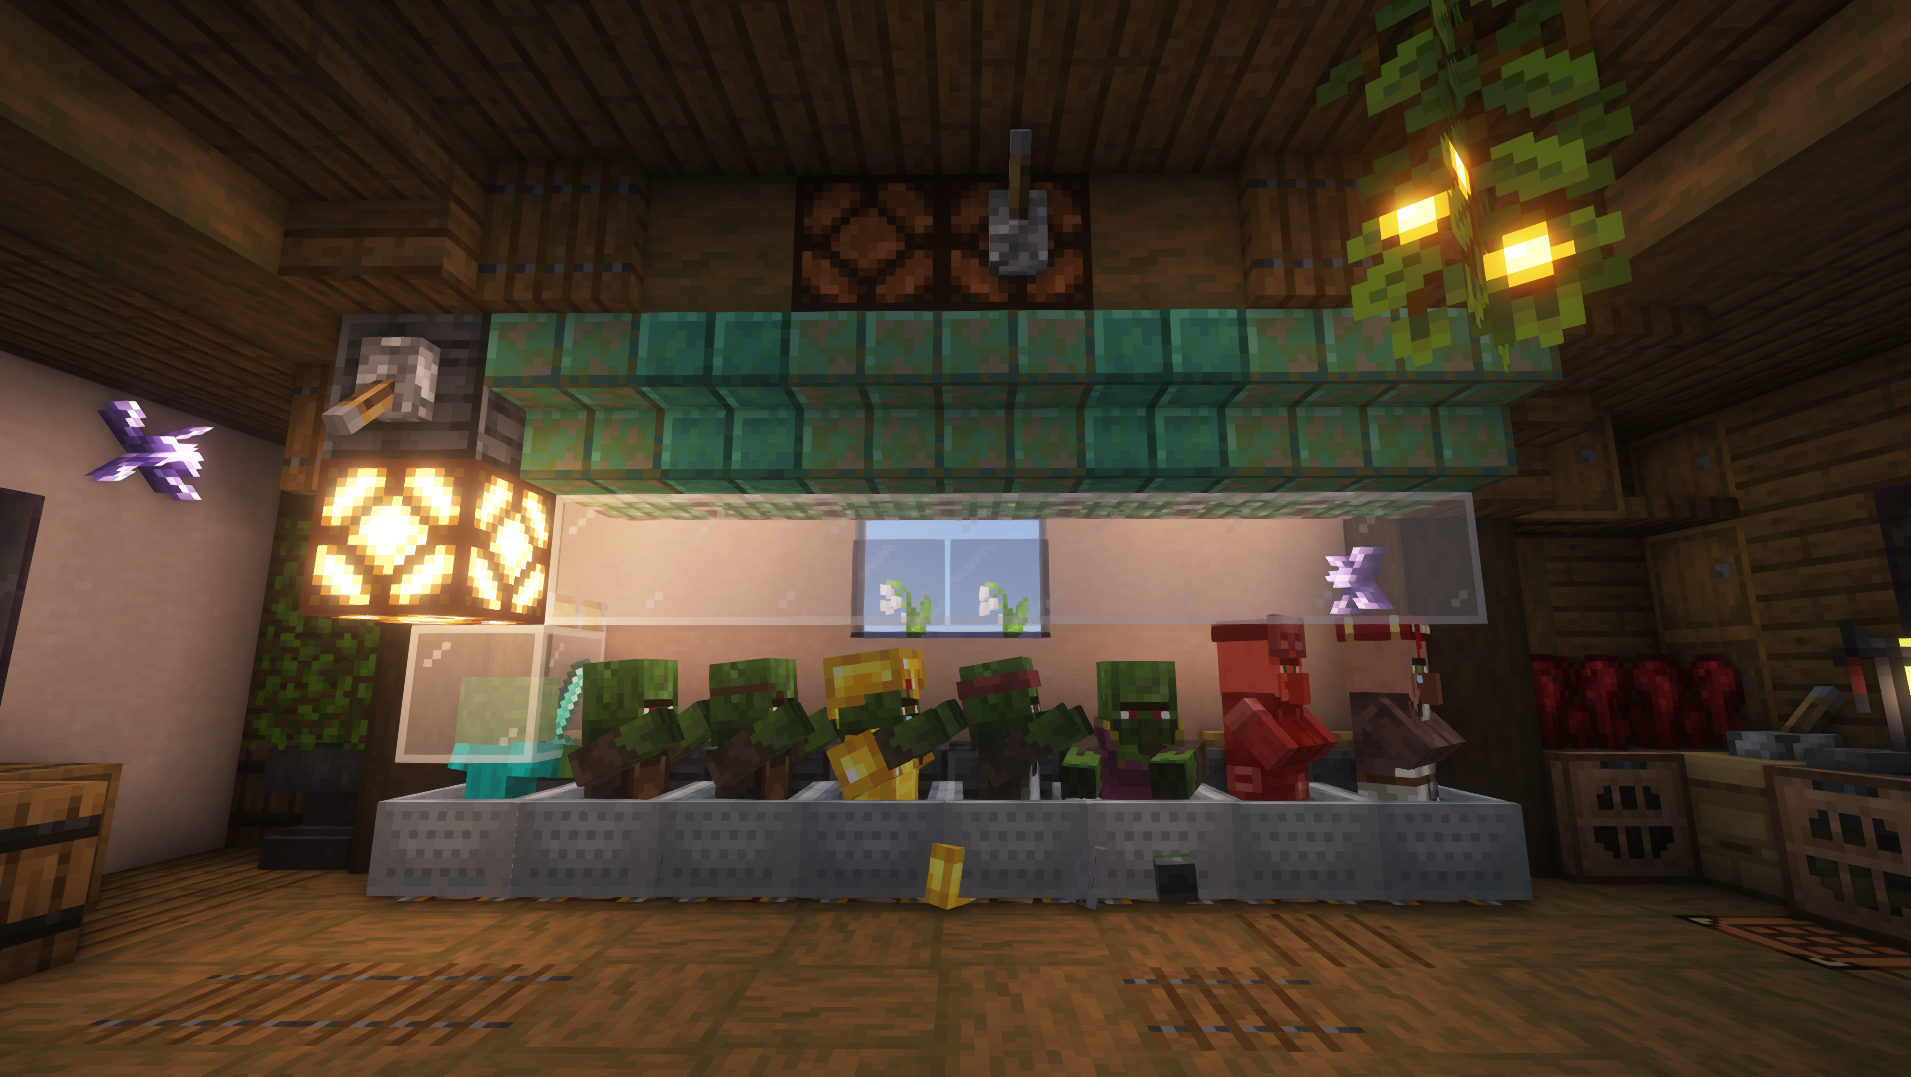 Minecract Multi Villager Curing System in Room with Potions Setup and Storage schematic (litematic)